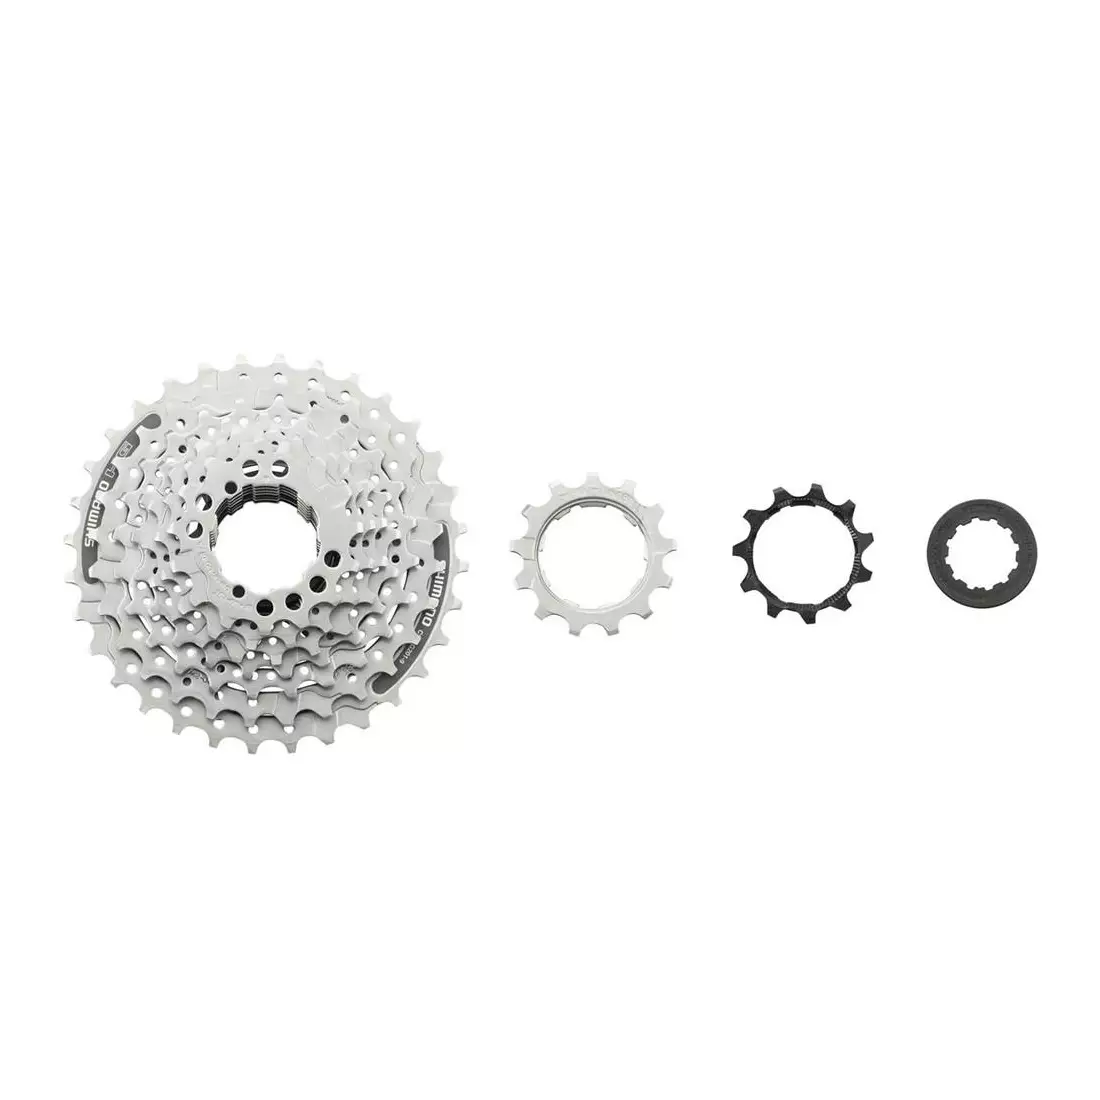 SHIMANO CS-HG201 bicycle cassette 9-speed 11-34T